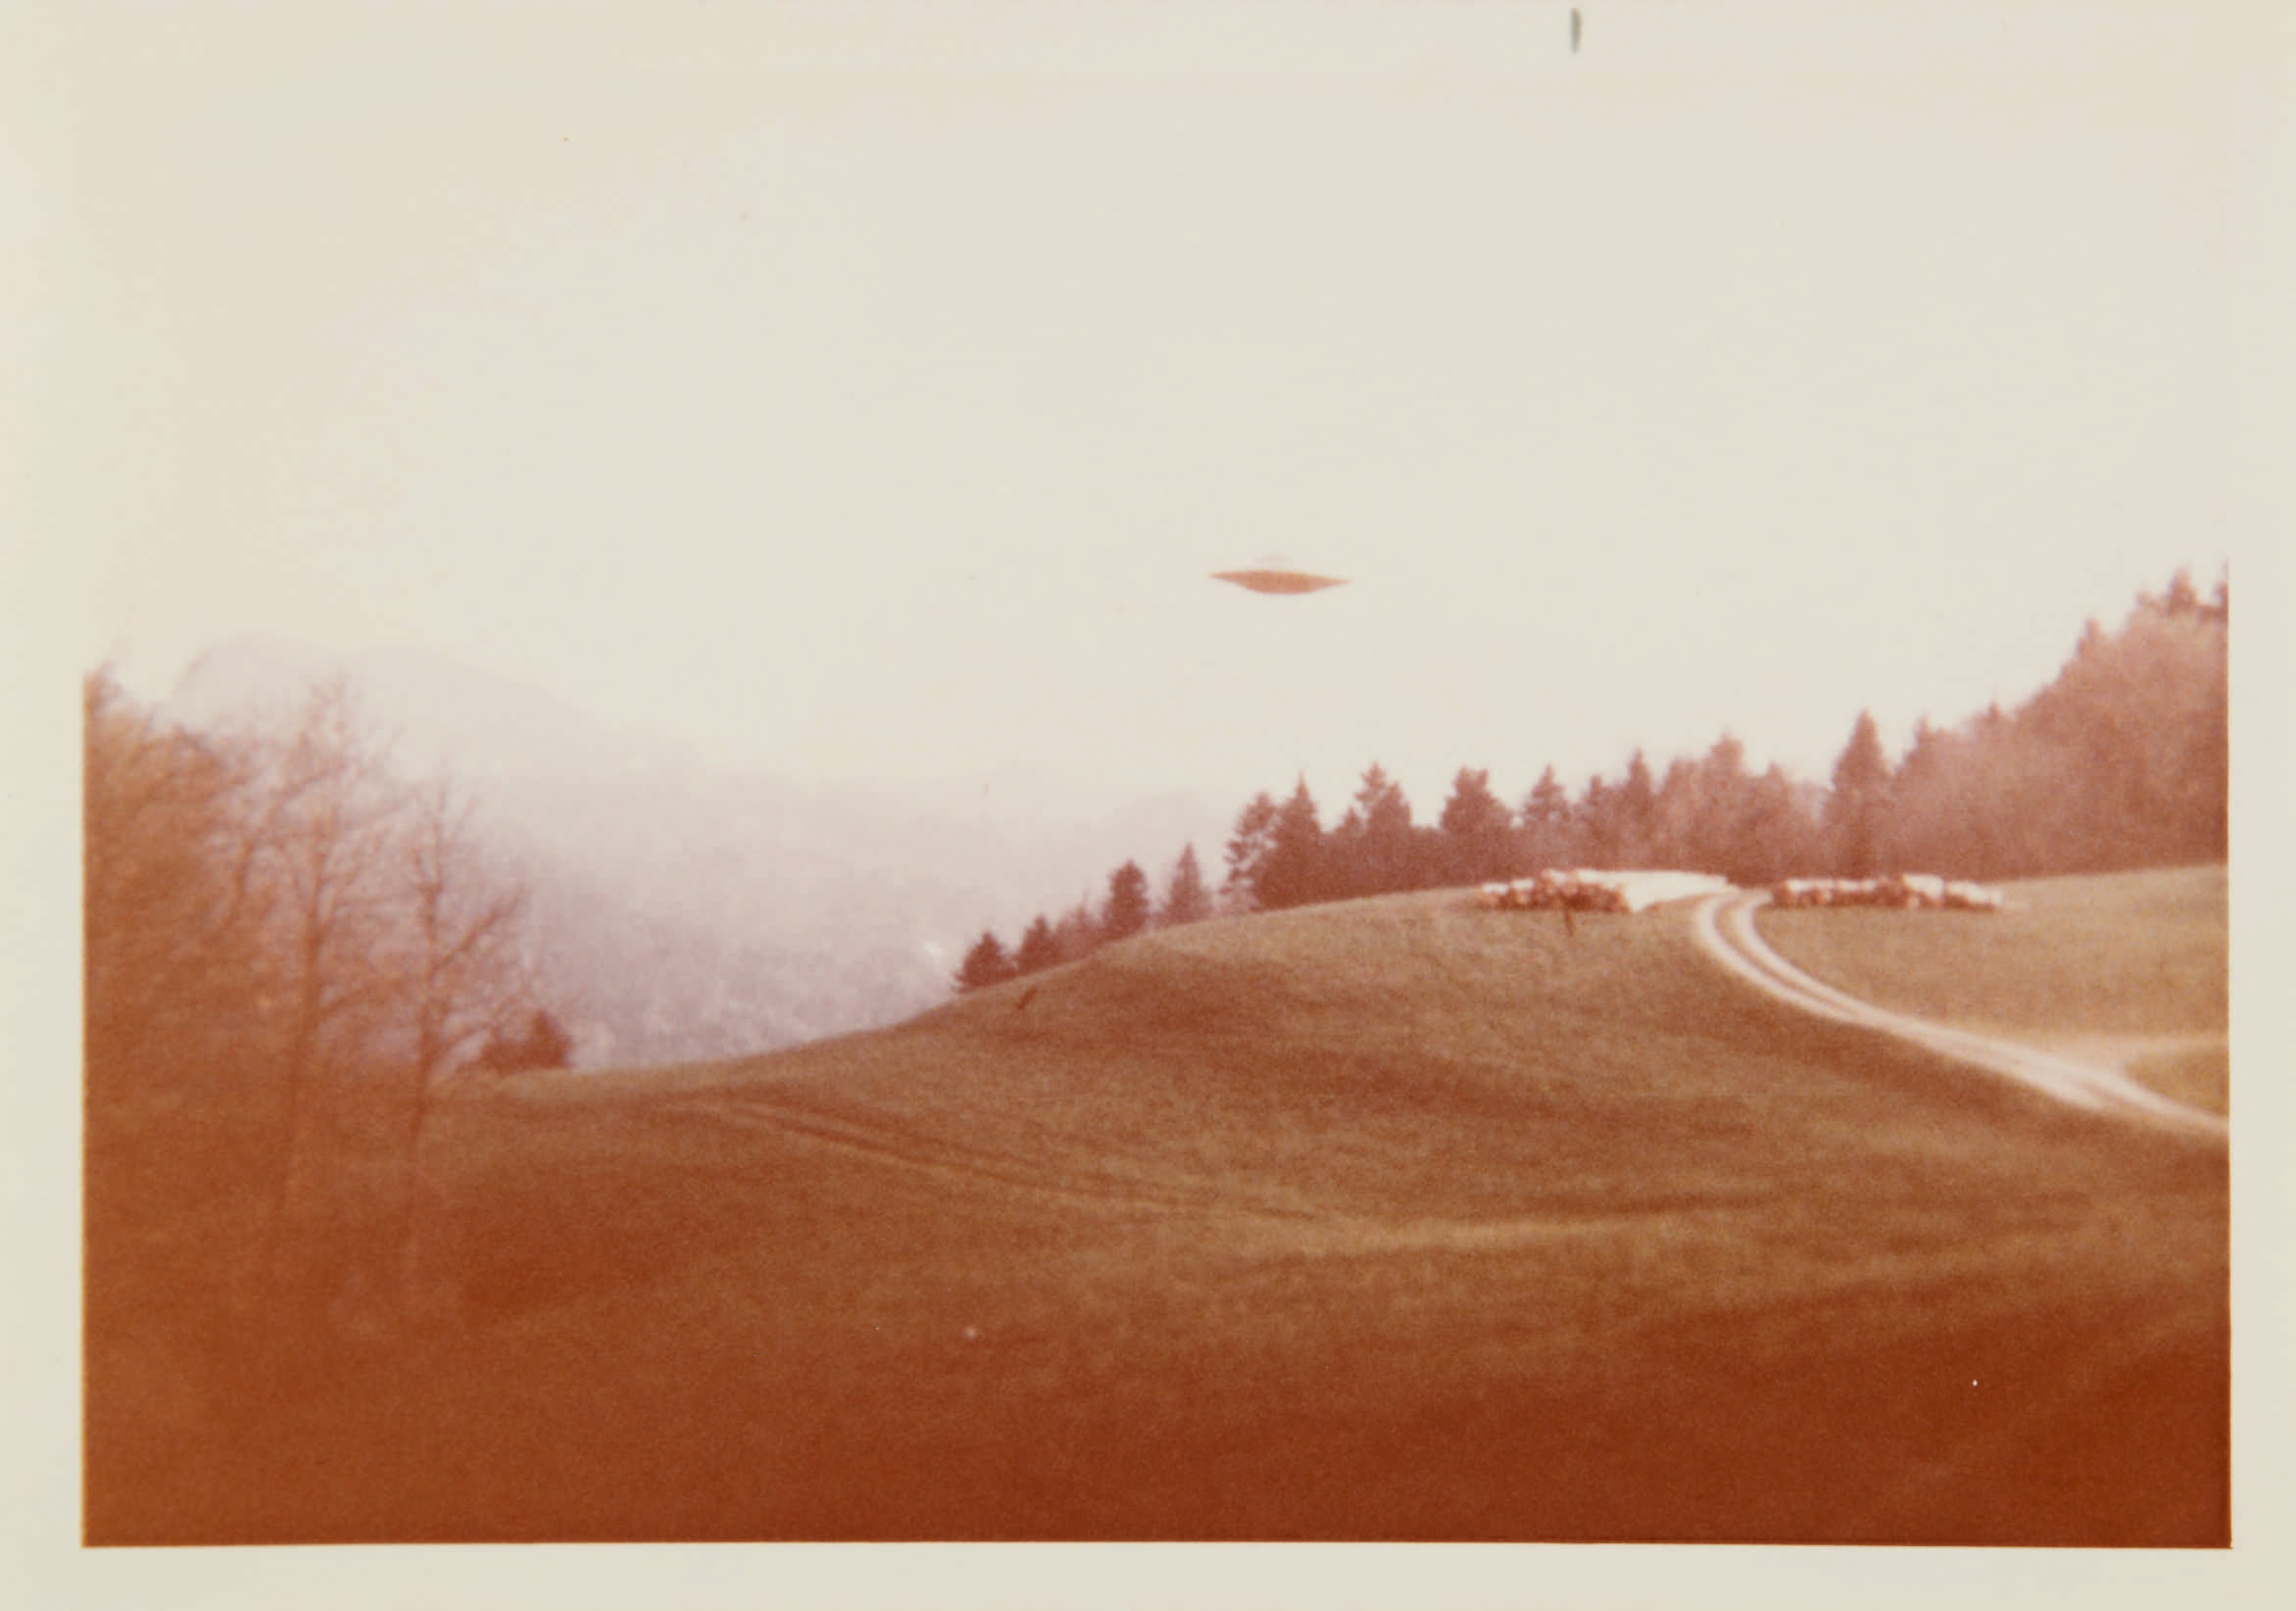 UFO photos made famous by 'The XFiles' surface, up for auction Fox News